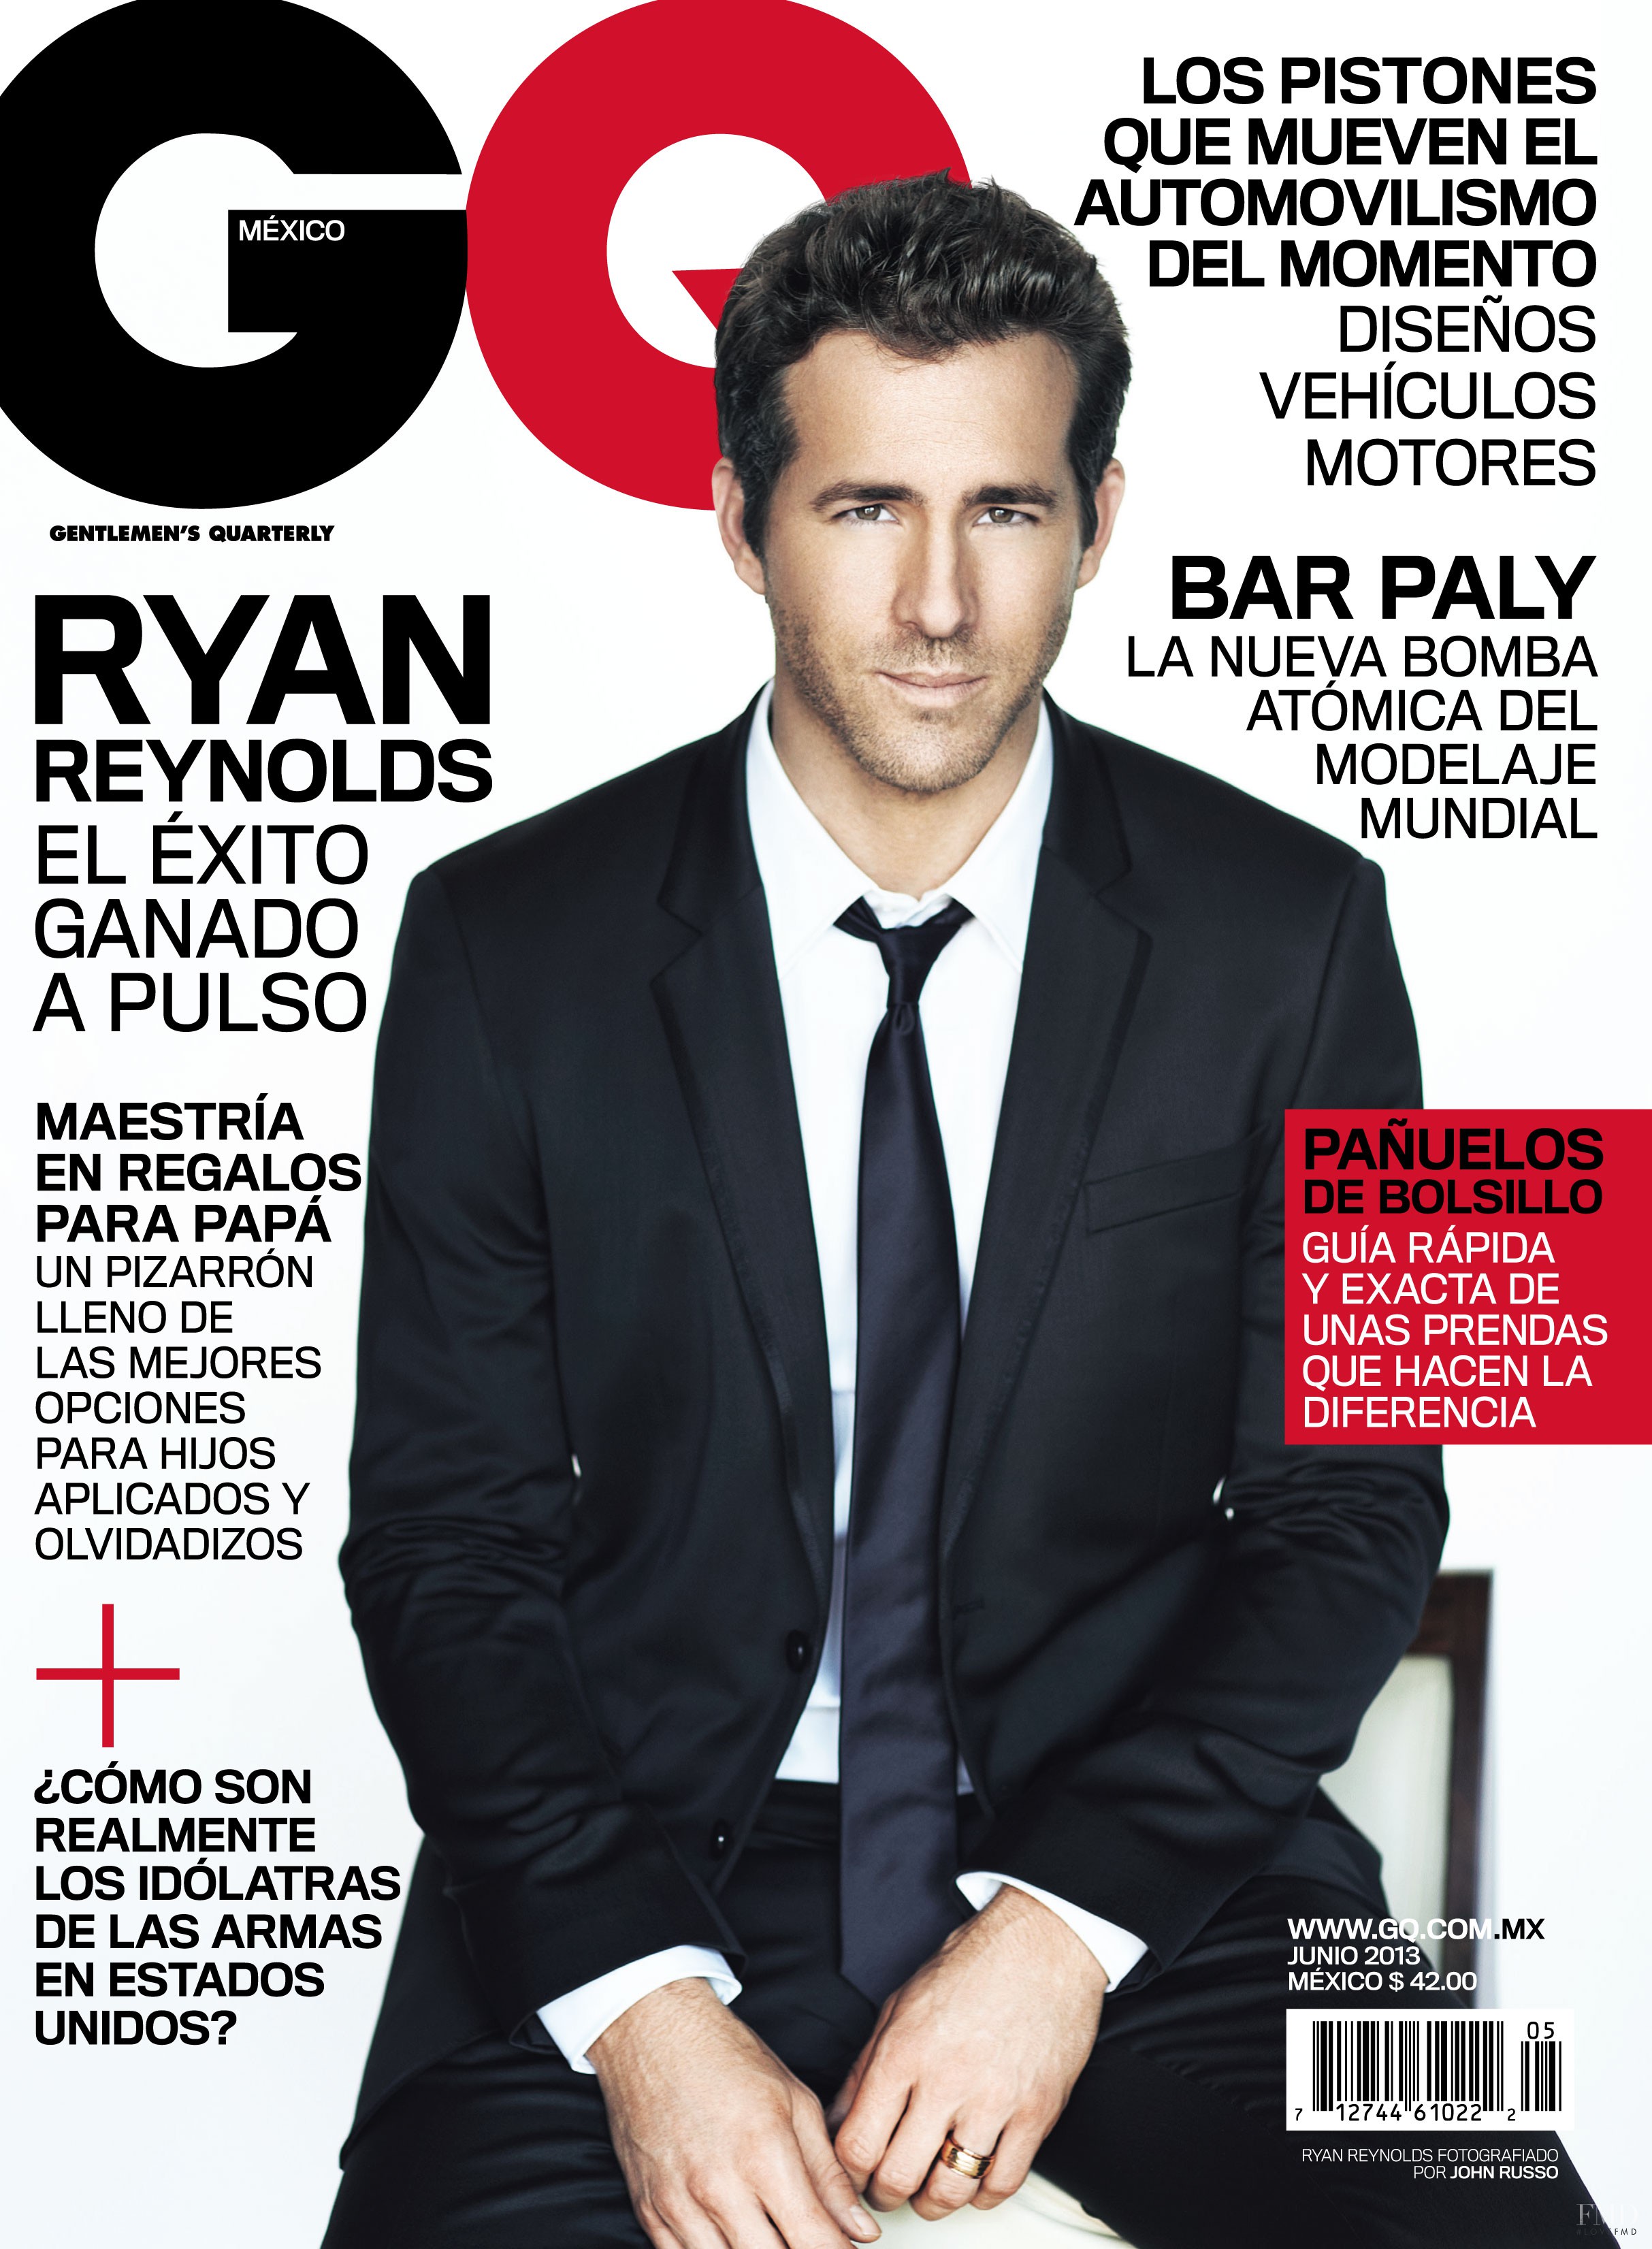 Cover of GQ Mexico with Ryan Reynolds, June 2013 (ID:21573)| Magazines ...